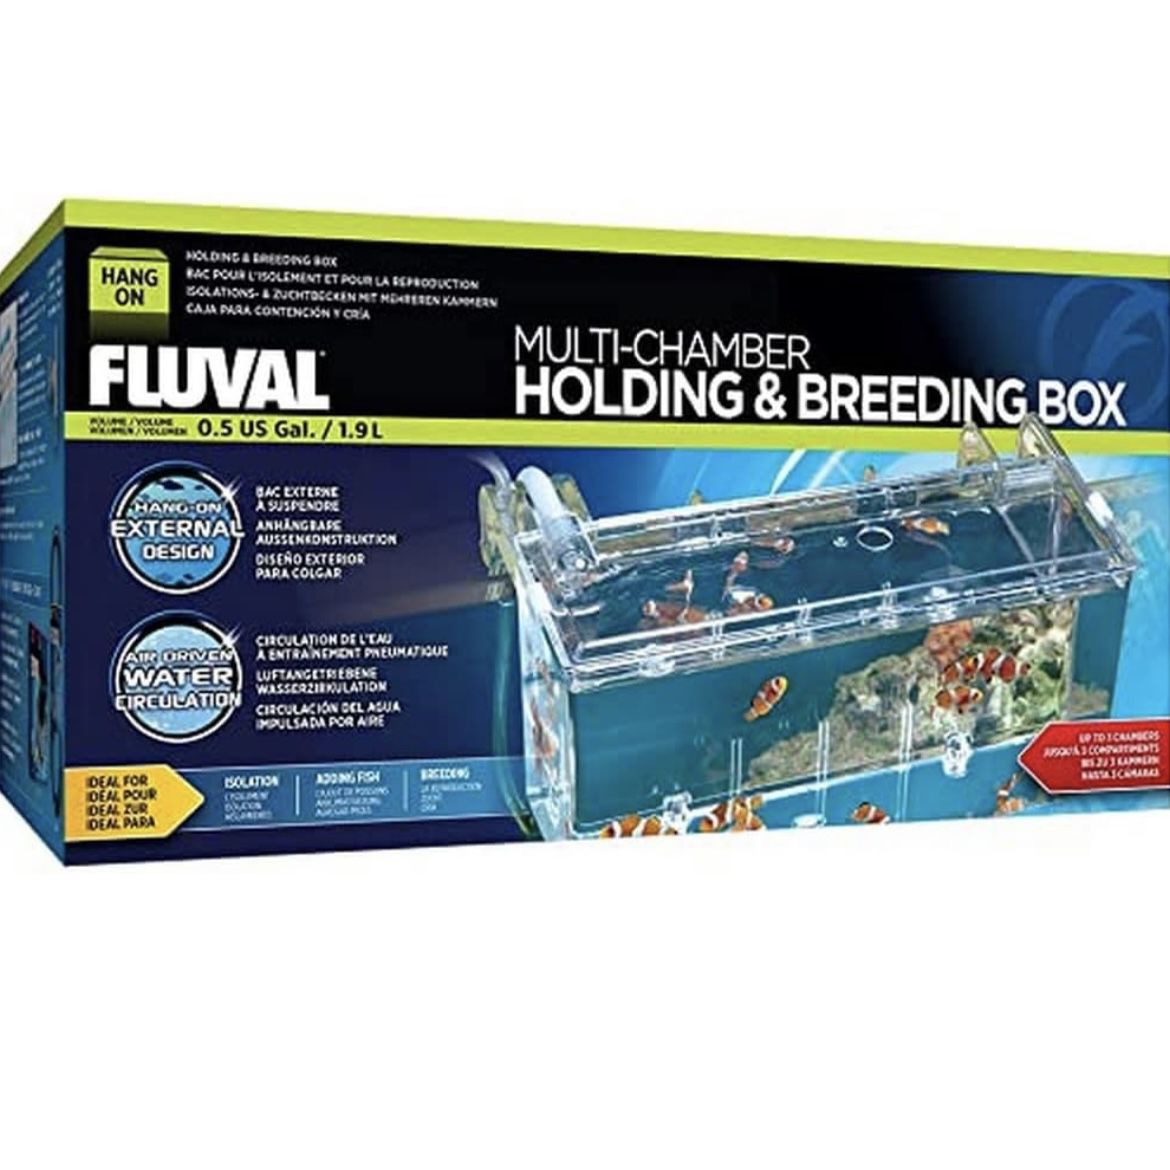 Fluval Multi-Chamber Holding and Breeding Box, Large – Up To 3 Separate Housing Compartments